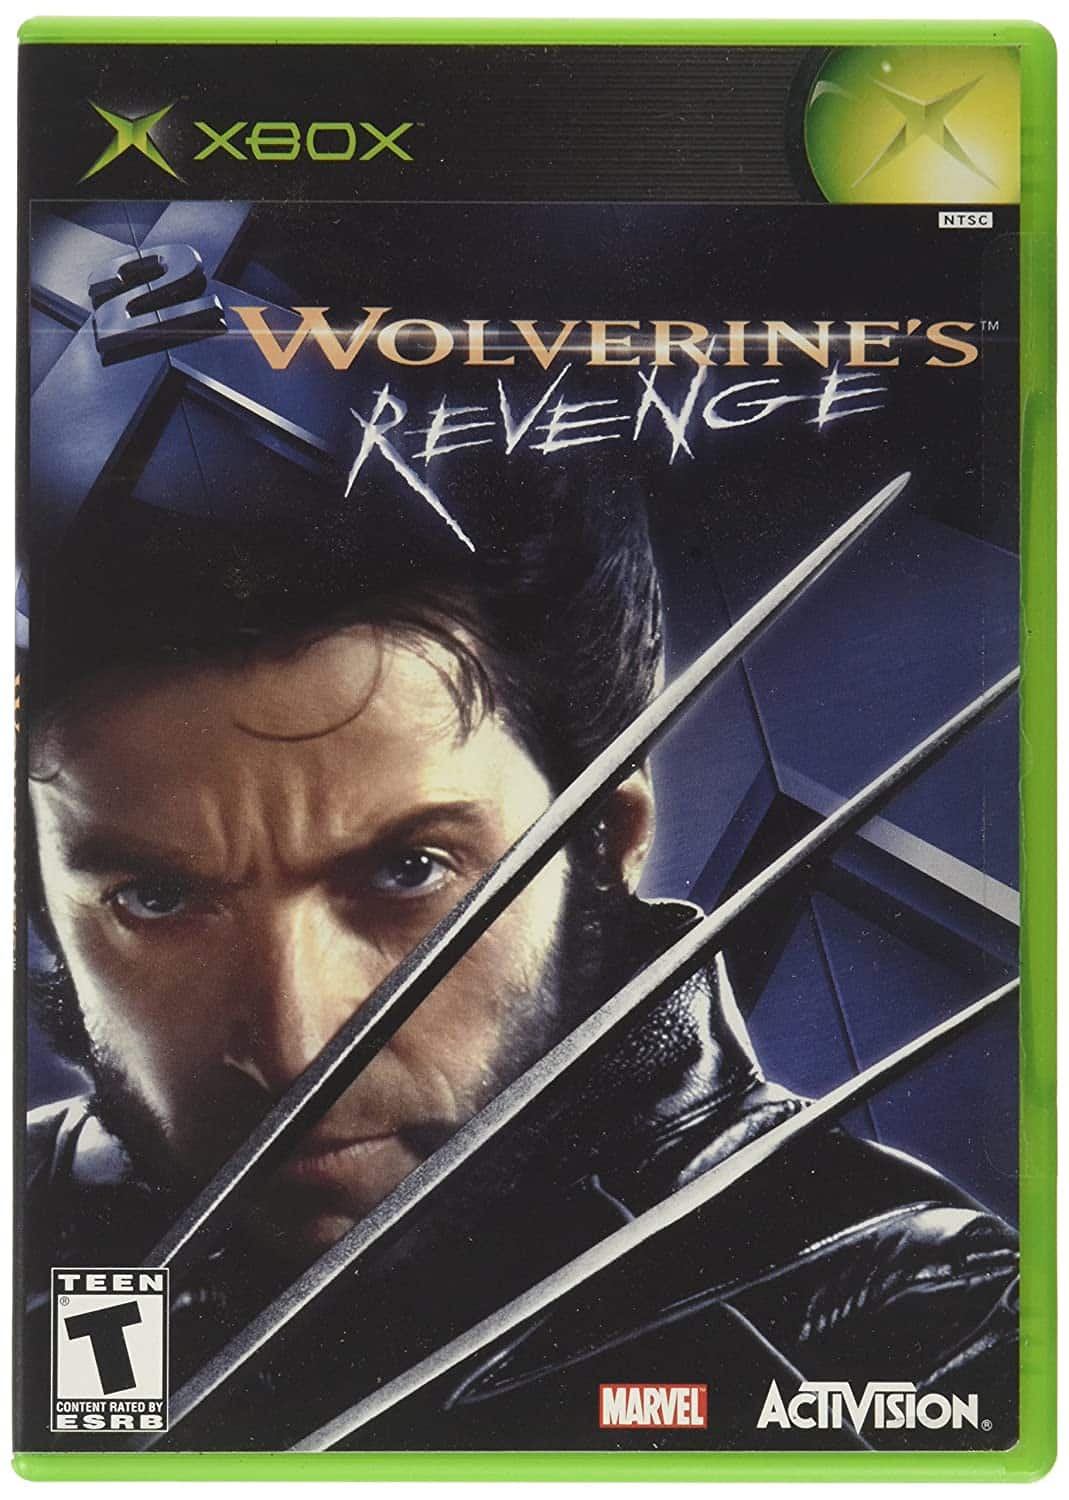 X2: Wolverine’s Revenge player count stats